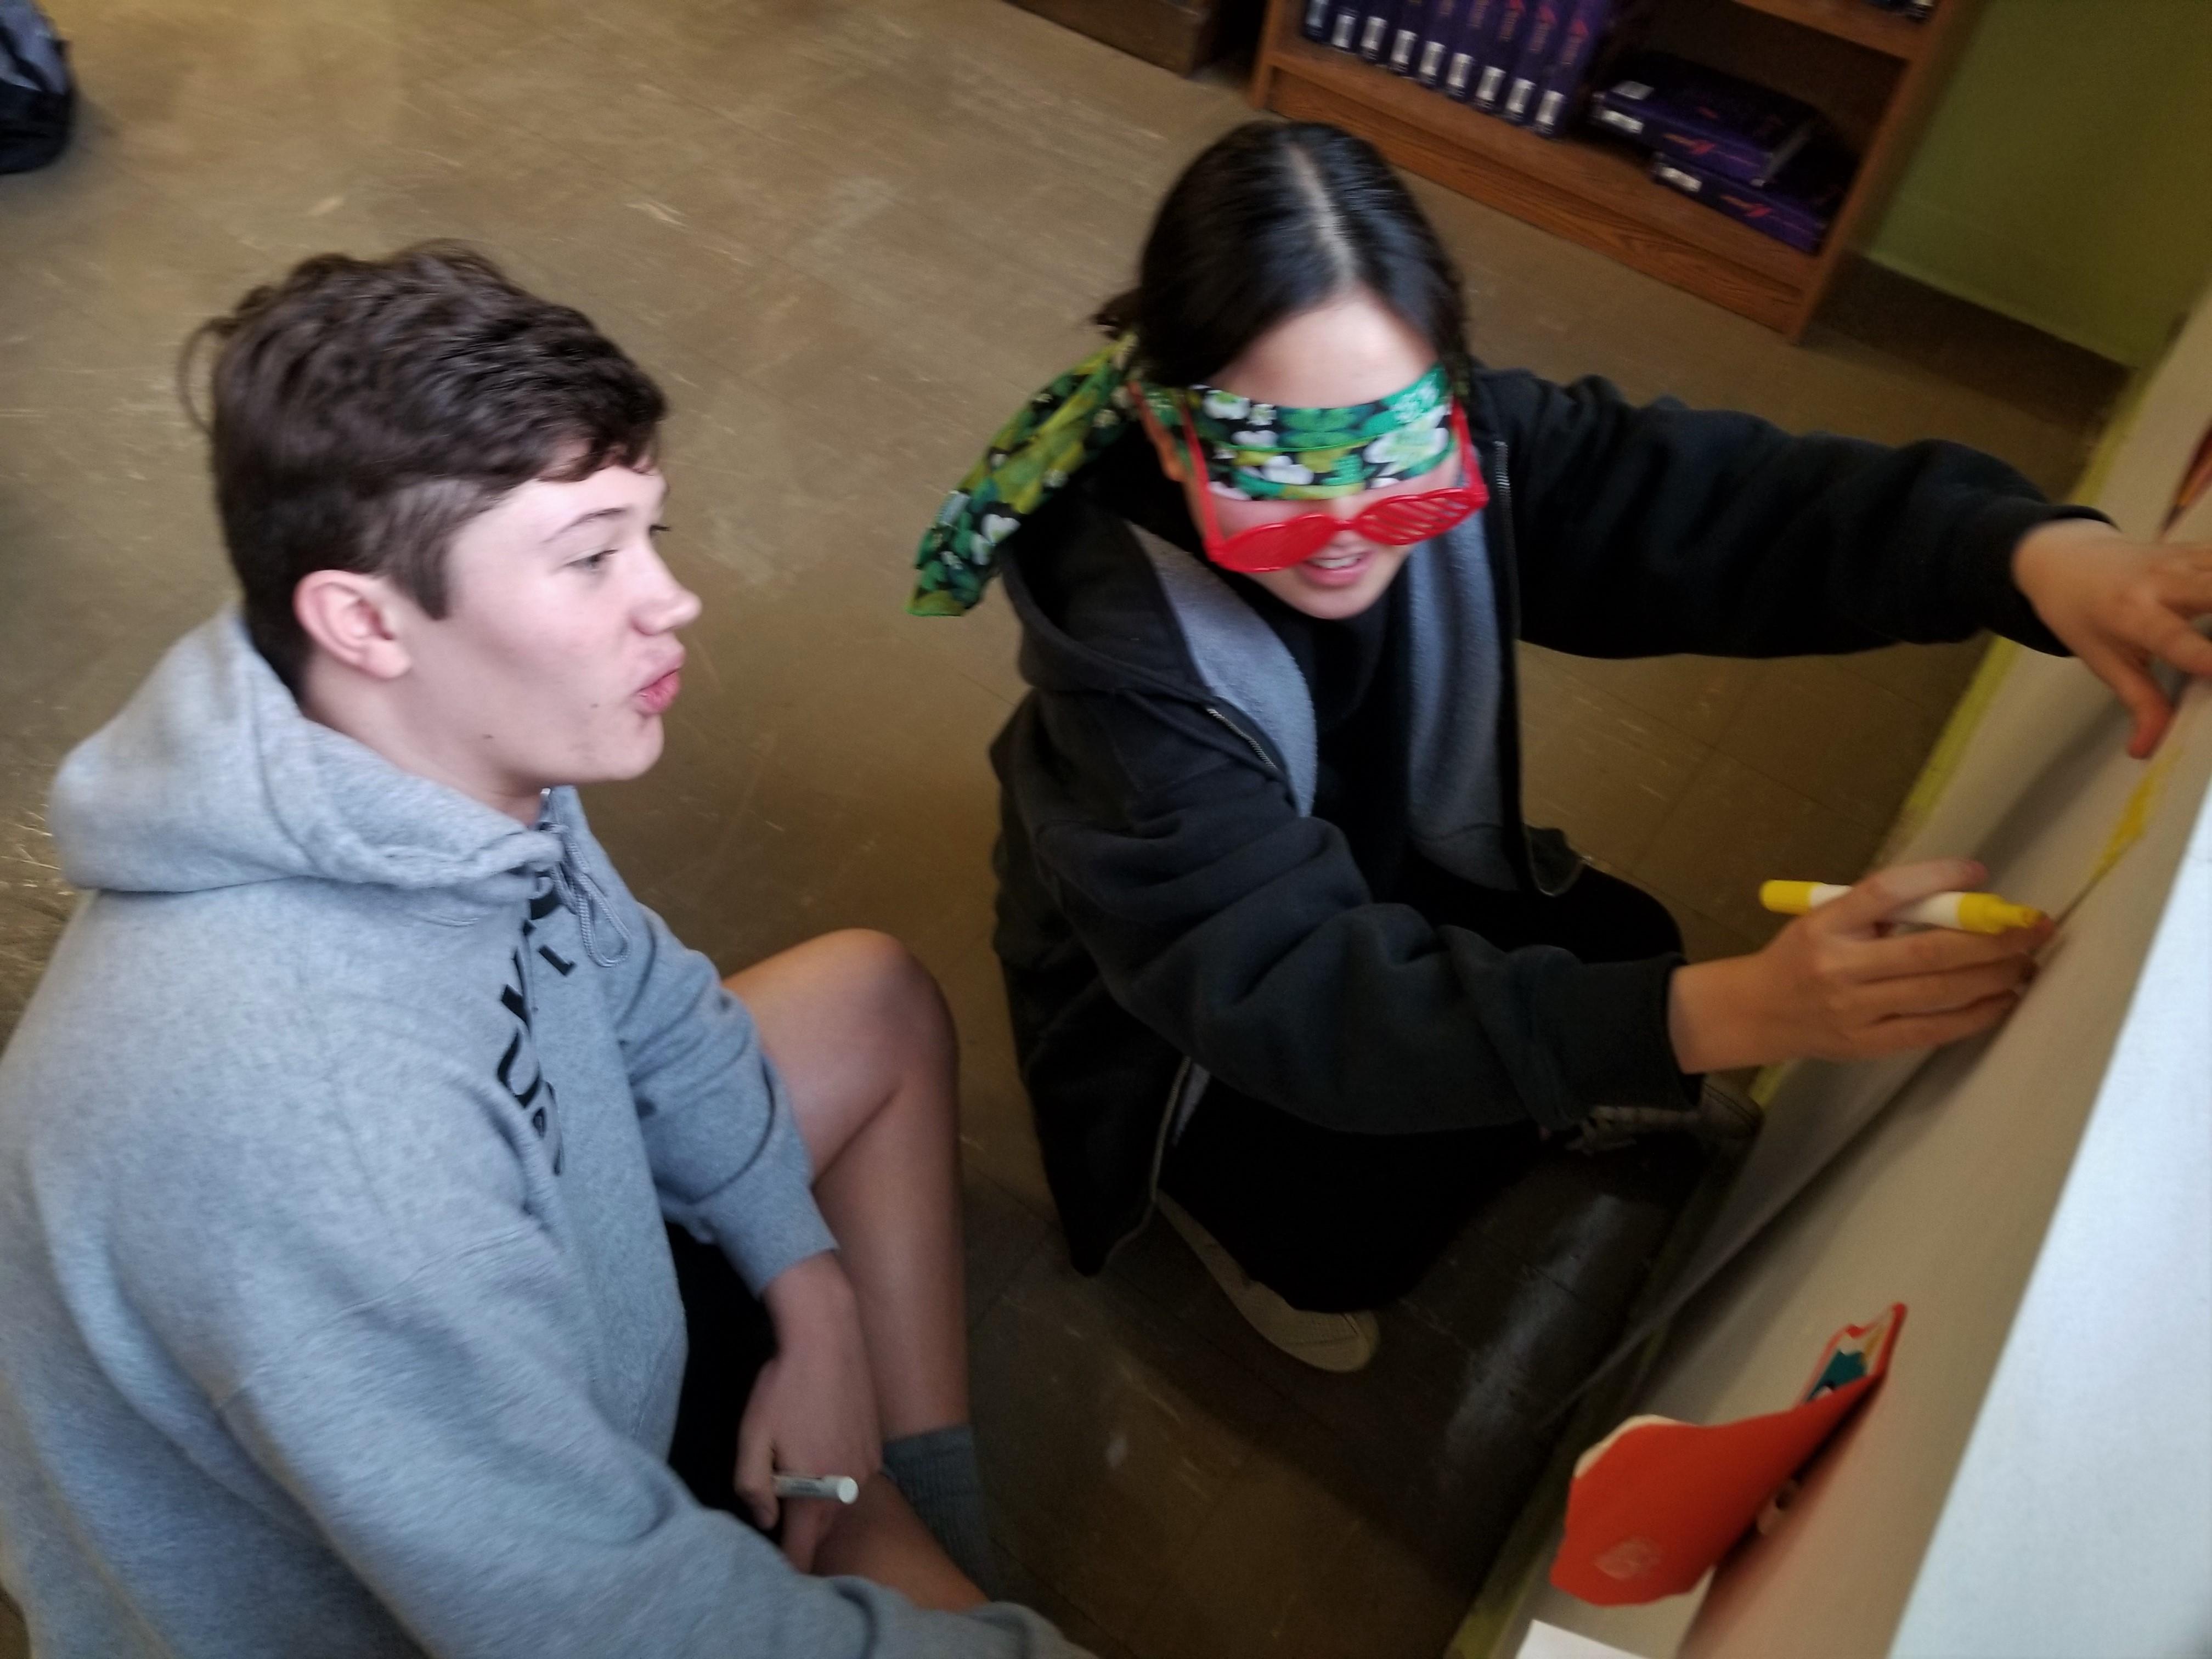 Blindfolded student receiving directions from a classmate.